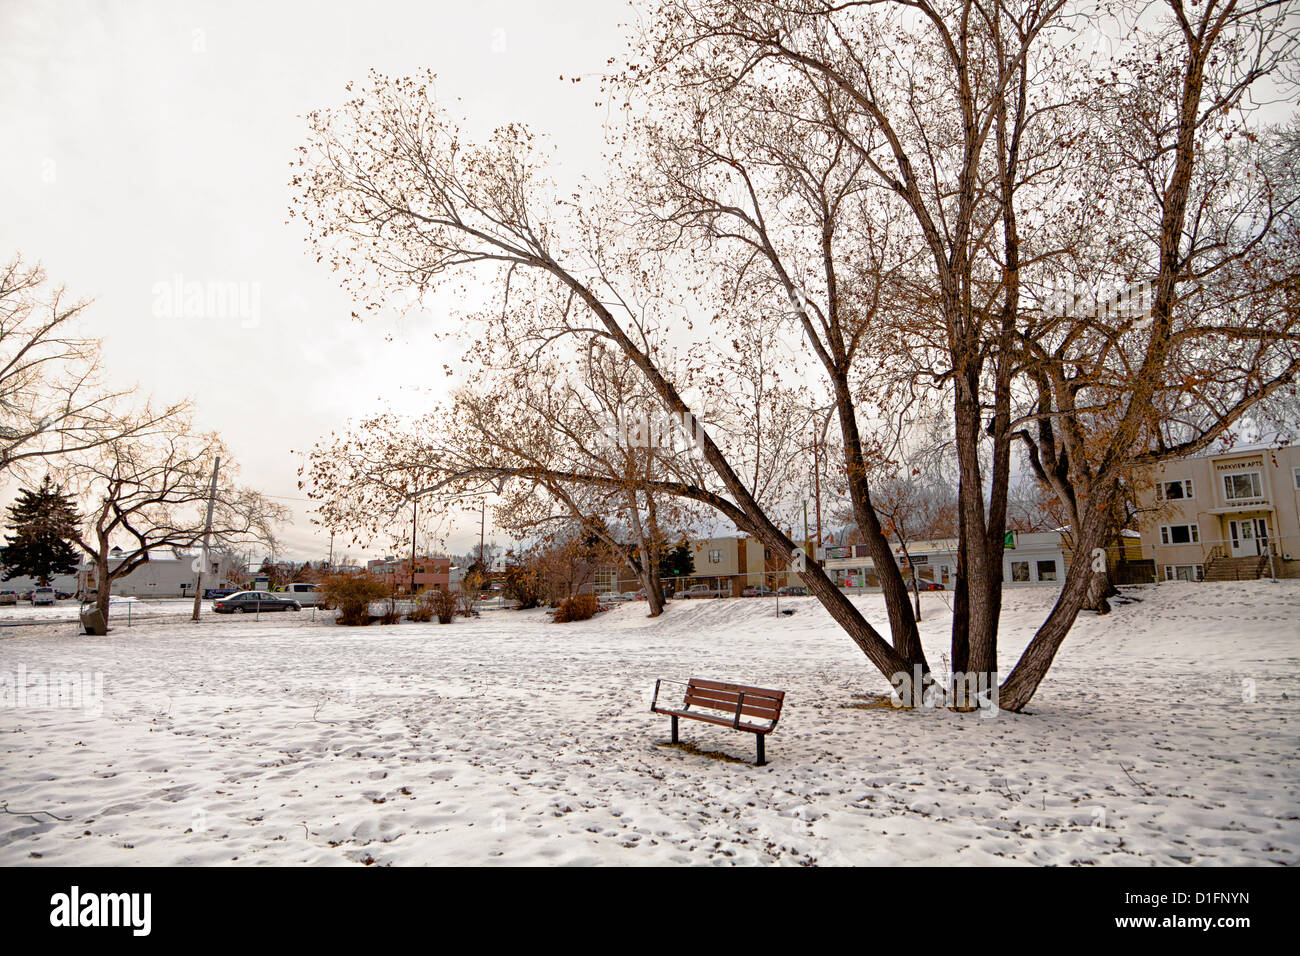 Calgary's Tuxedo park in the winter, footprints in the snow. Stock Photo